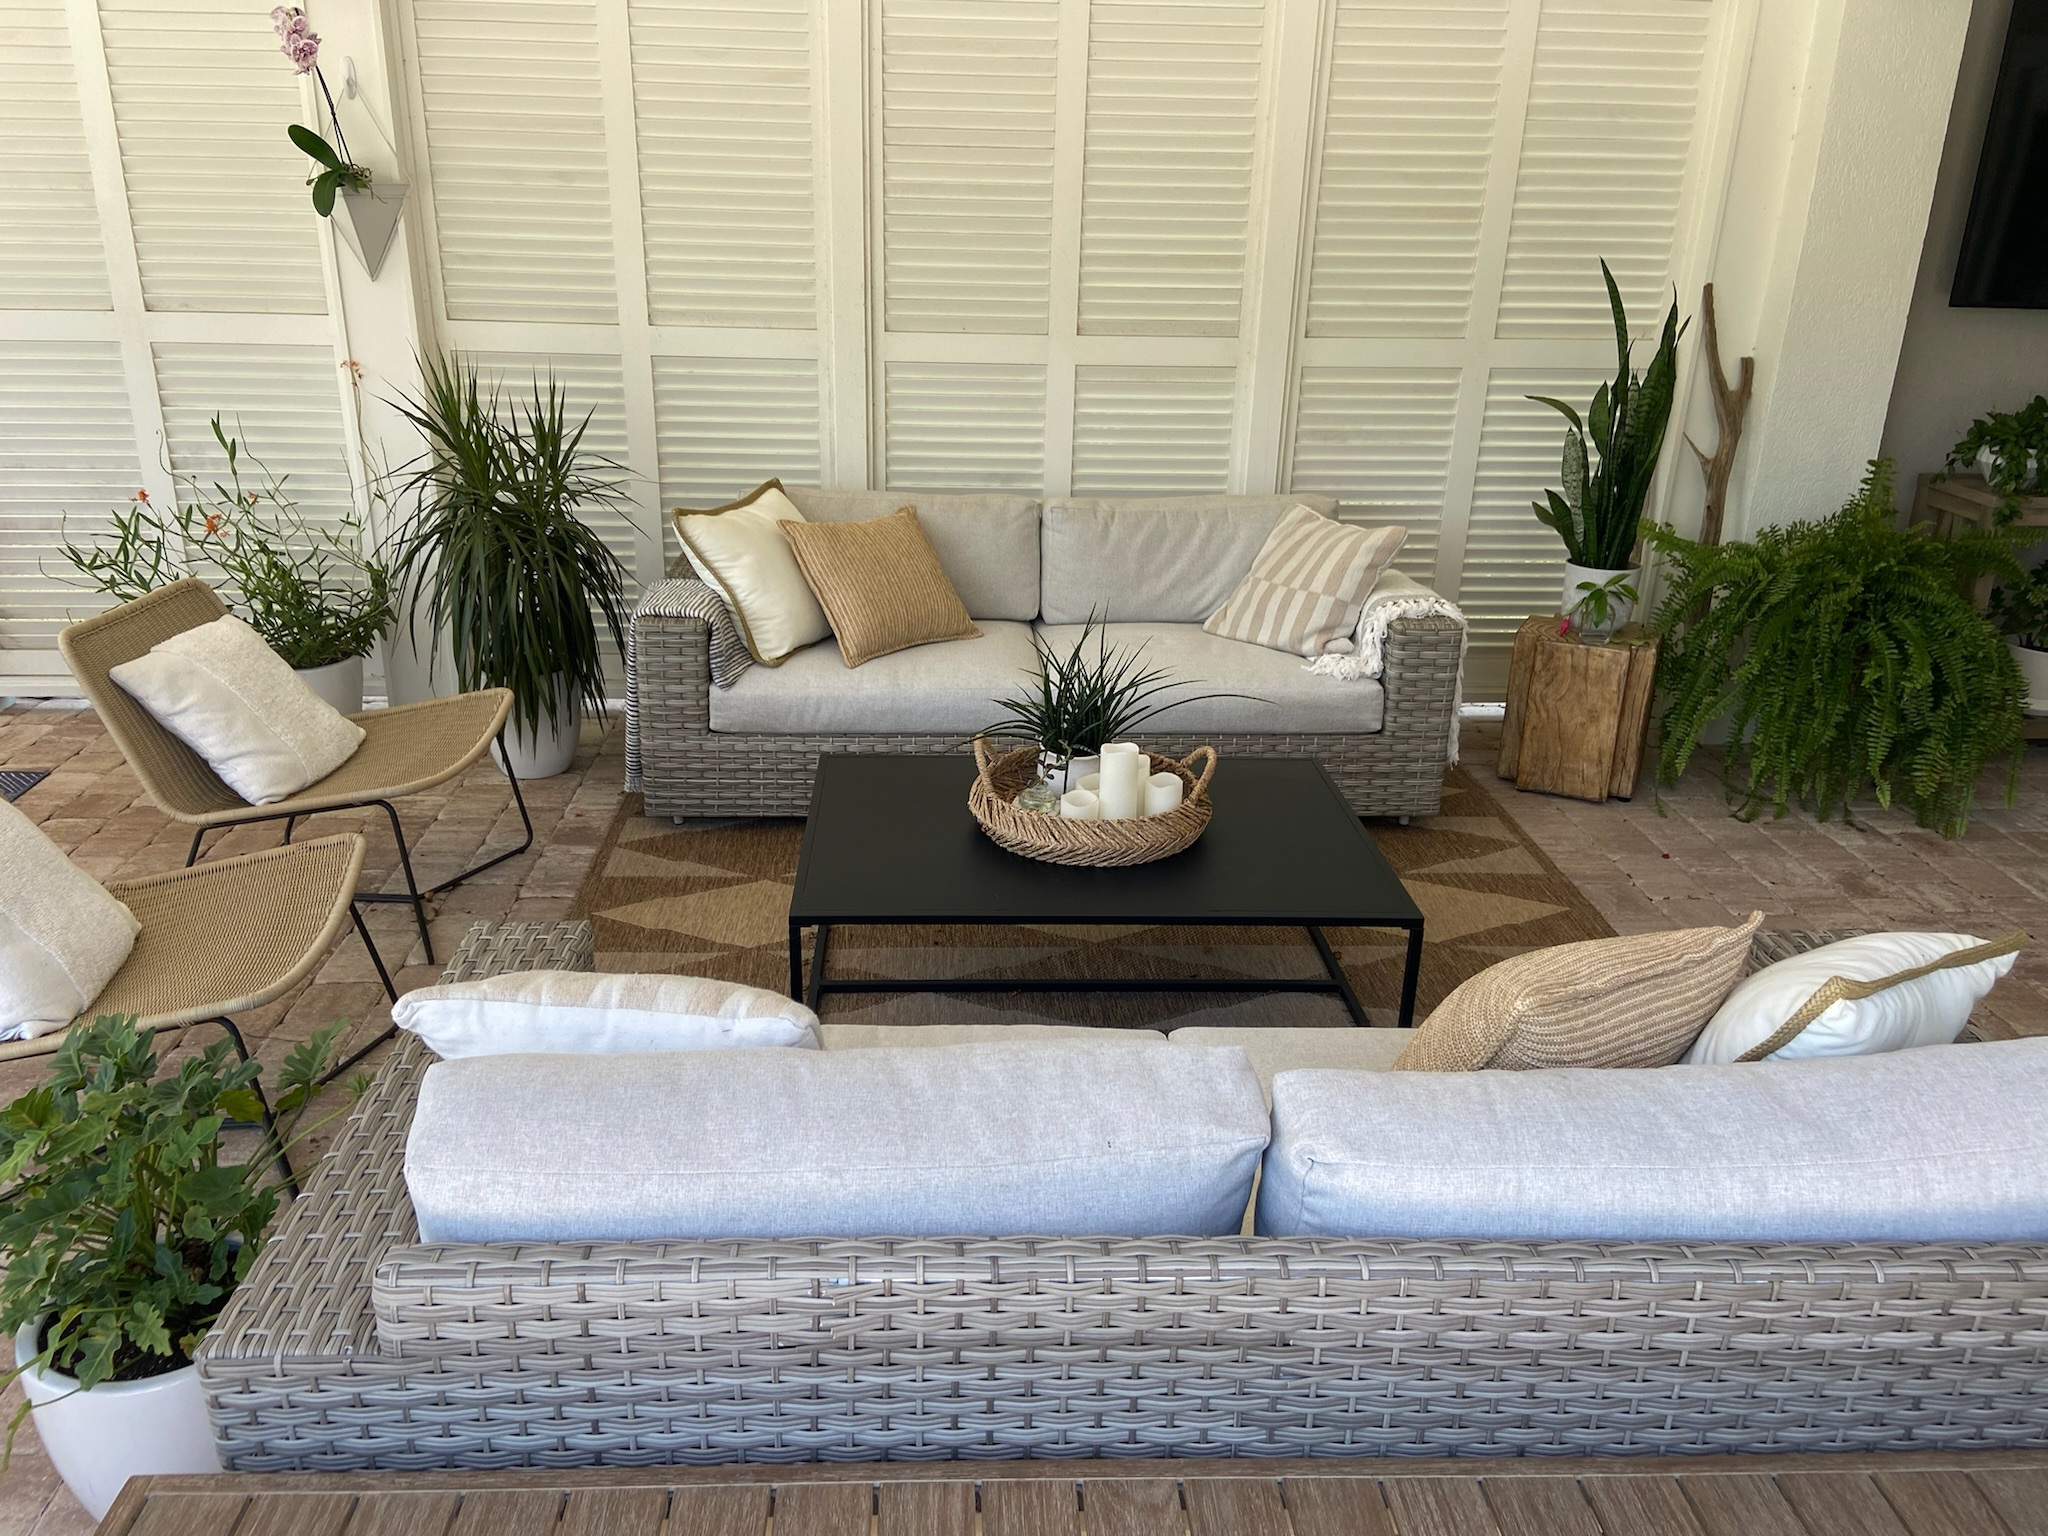 This patio seating area is comprised of two love seats and chairs with a coffee table in the middle. All the furniture gives off a coastal modern vibe.